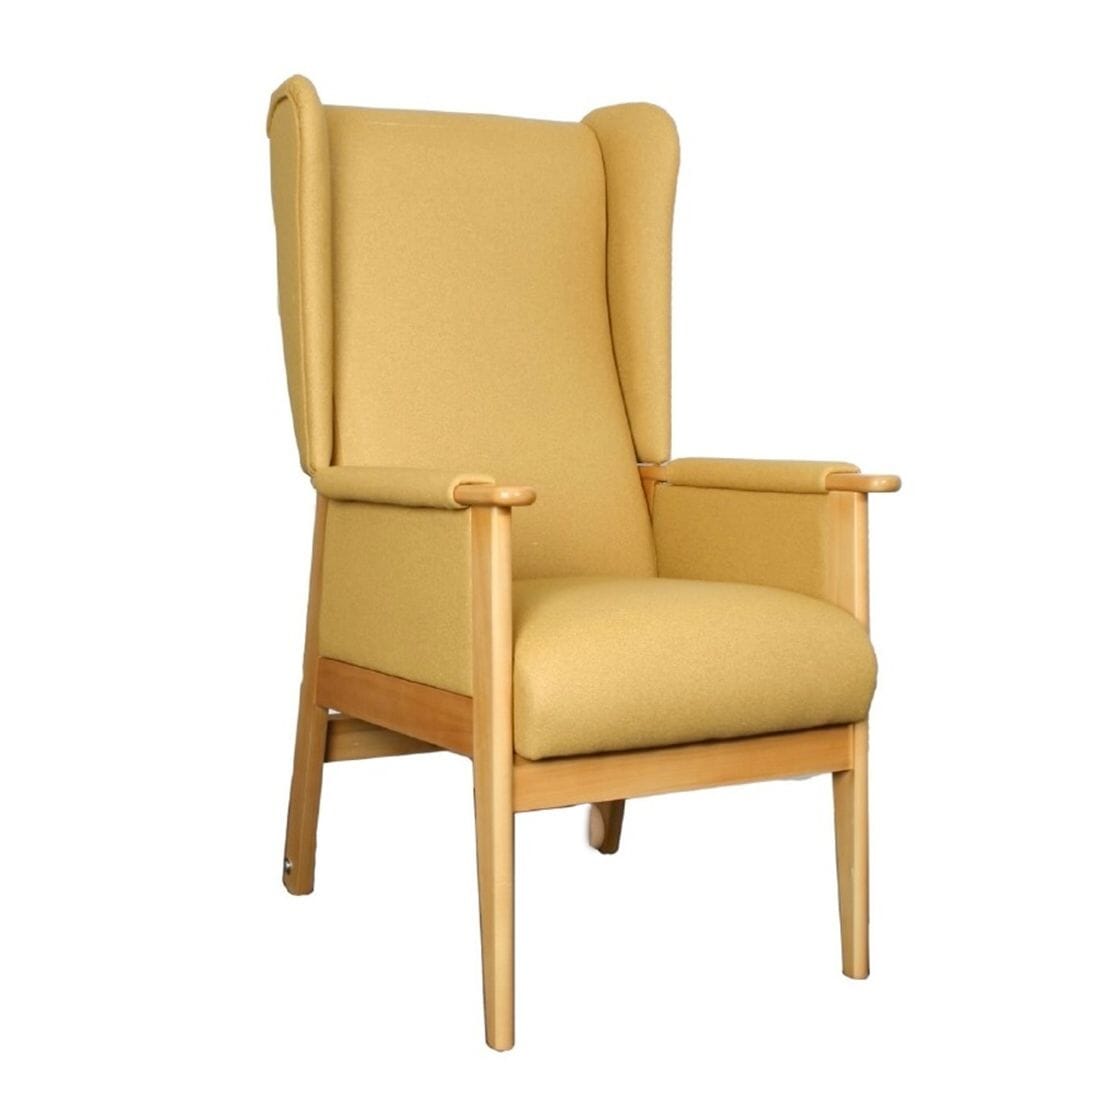 View Deluxe Sandringham Chair Champagne Dralon information